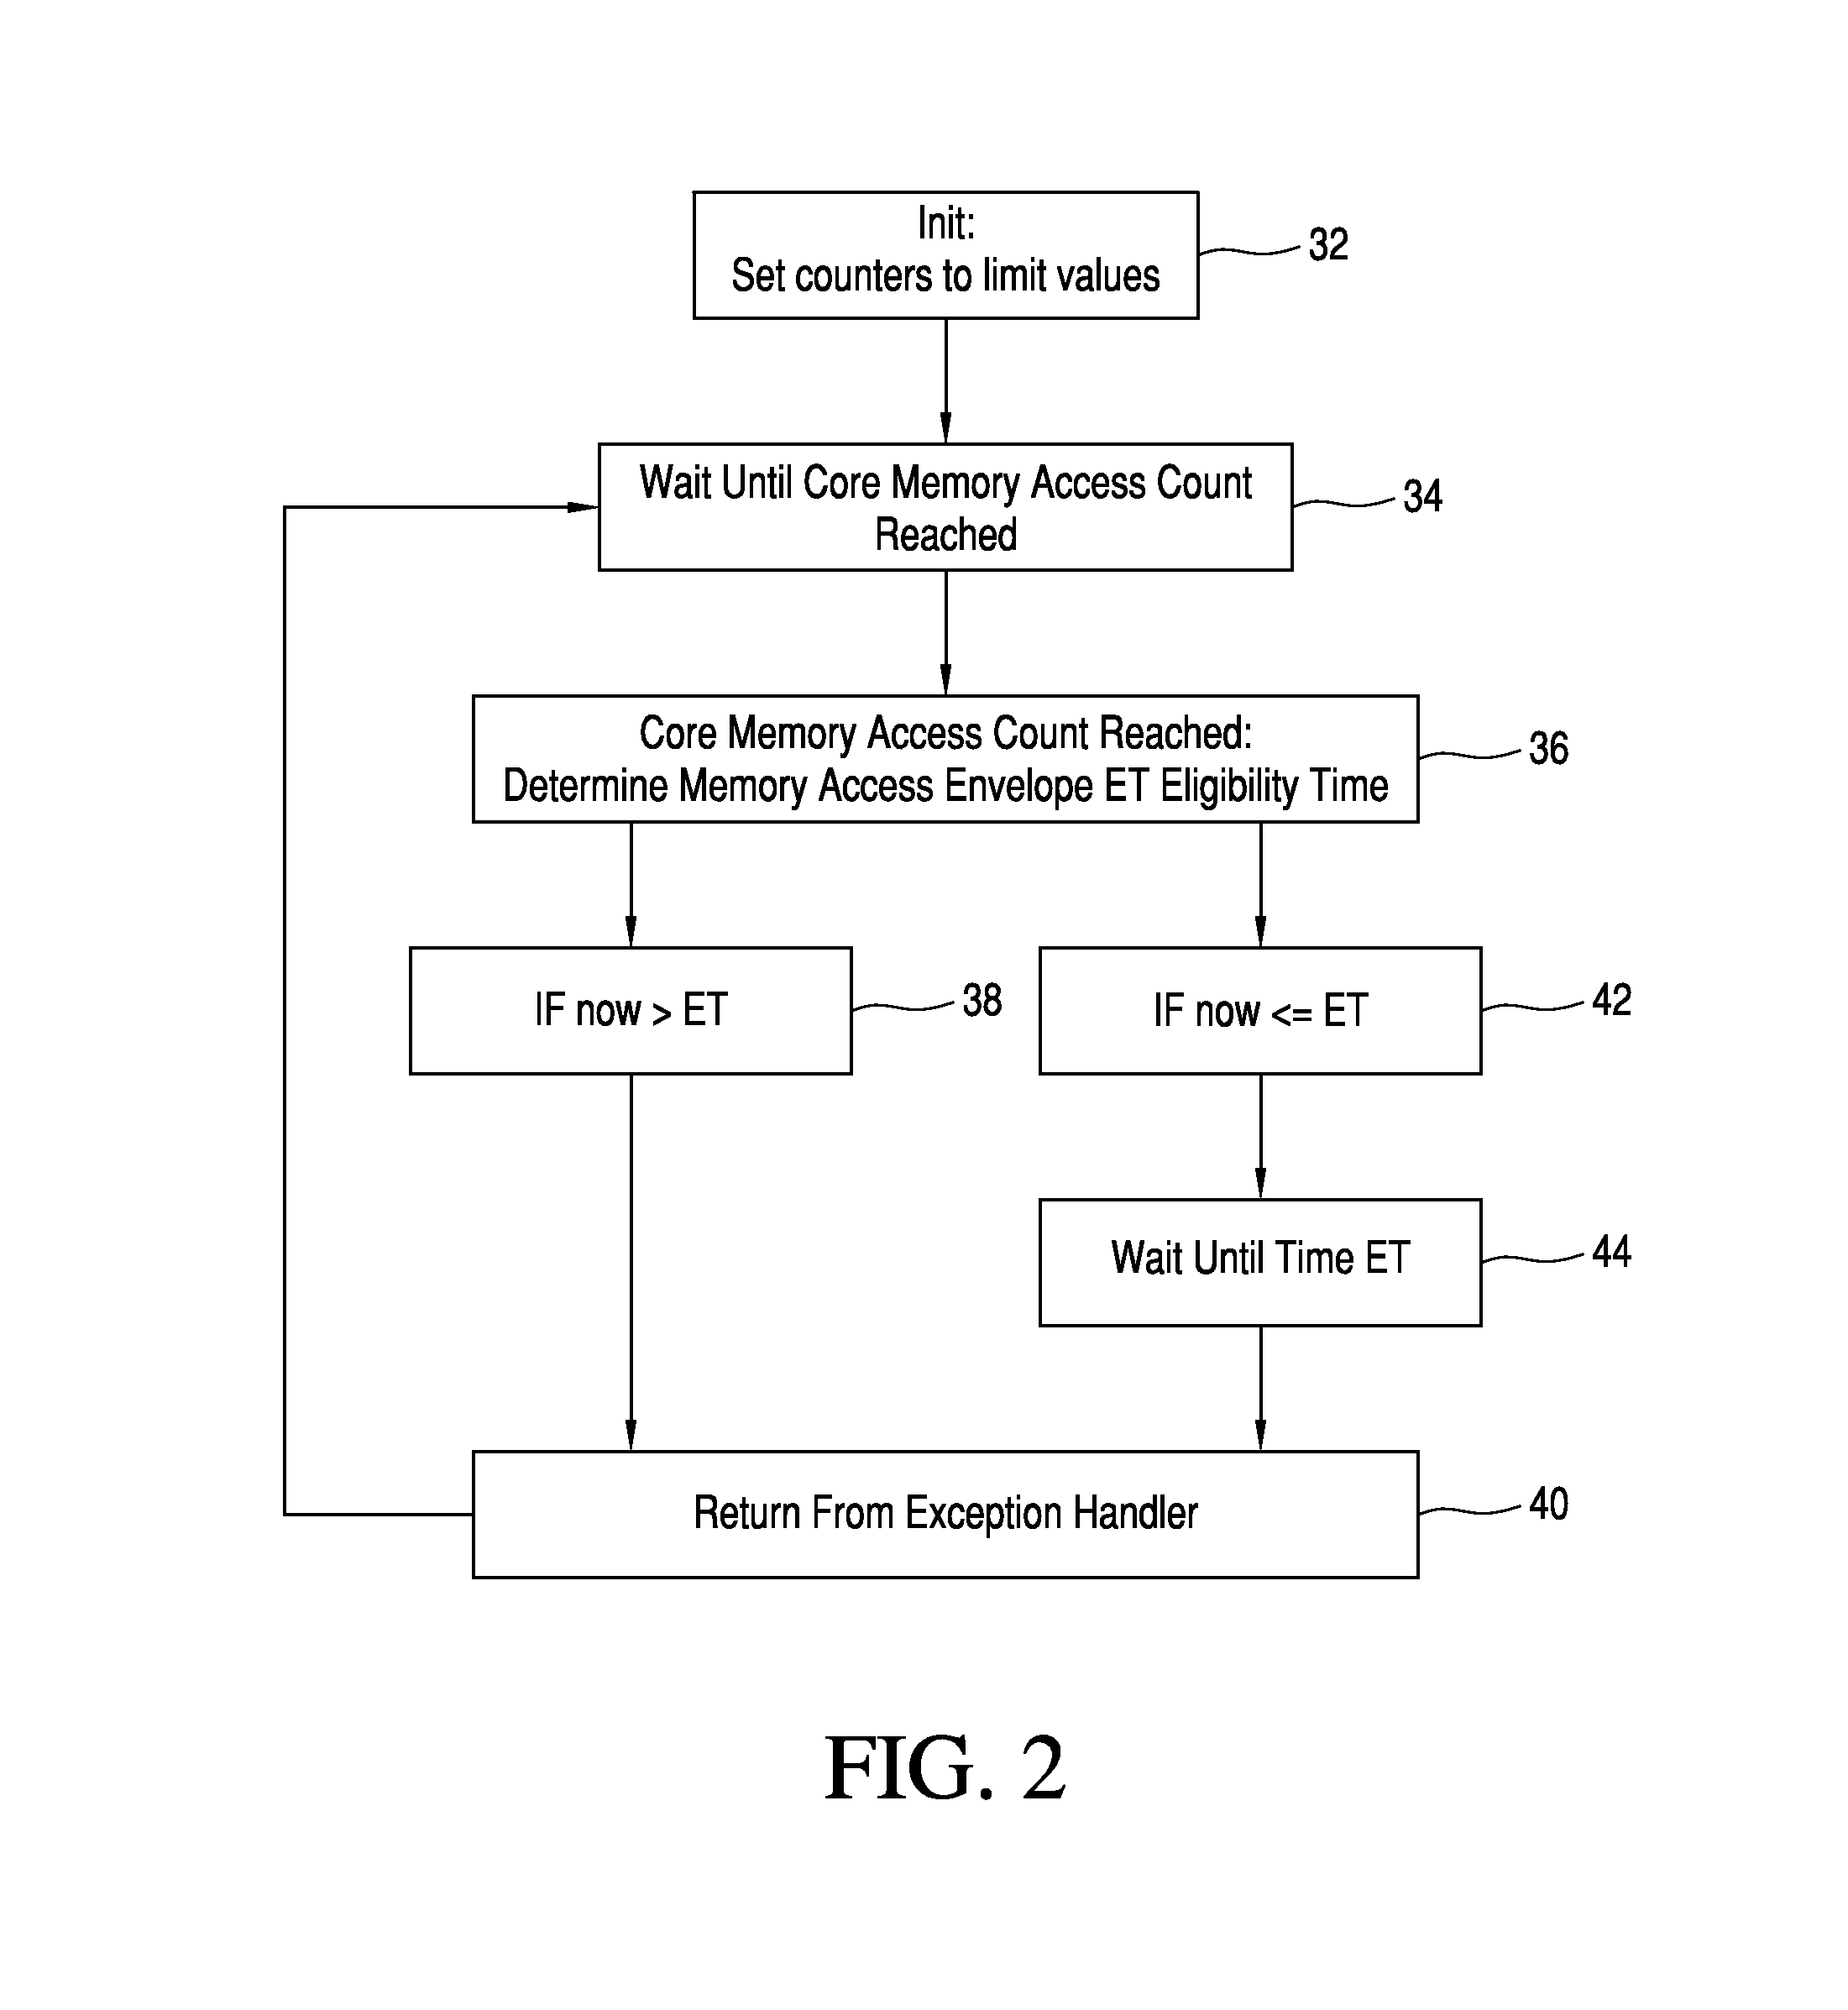 Multi-core processor system configured to constrain access rate from memory